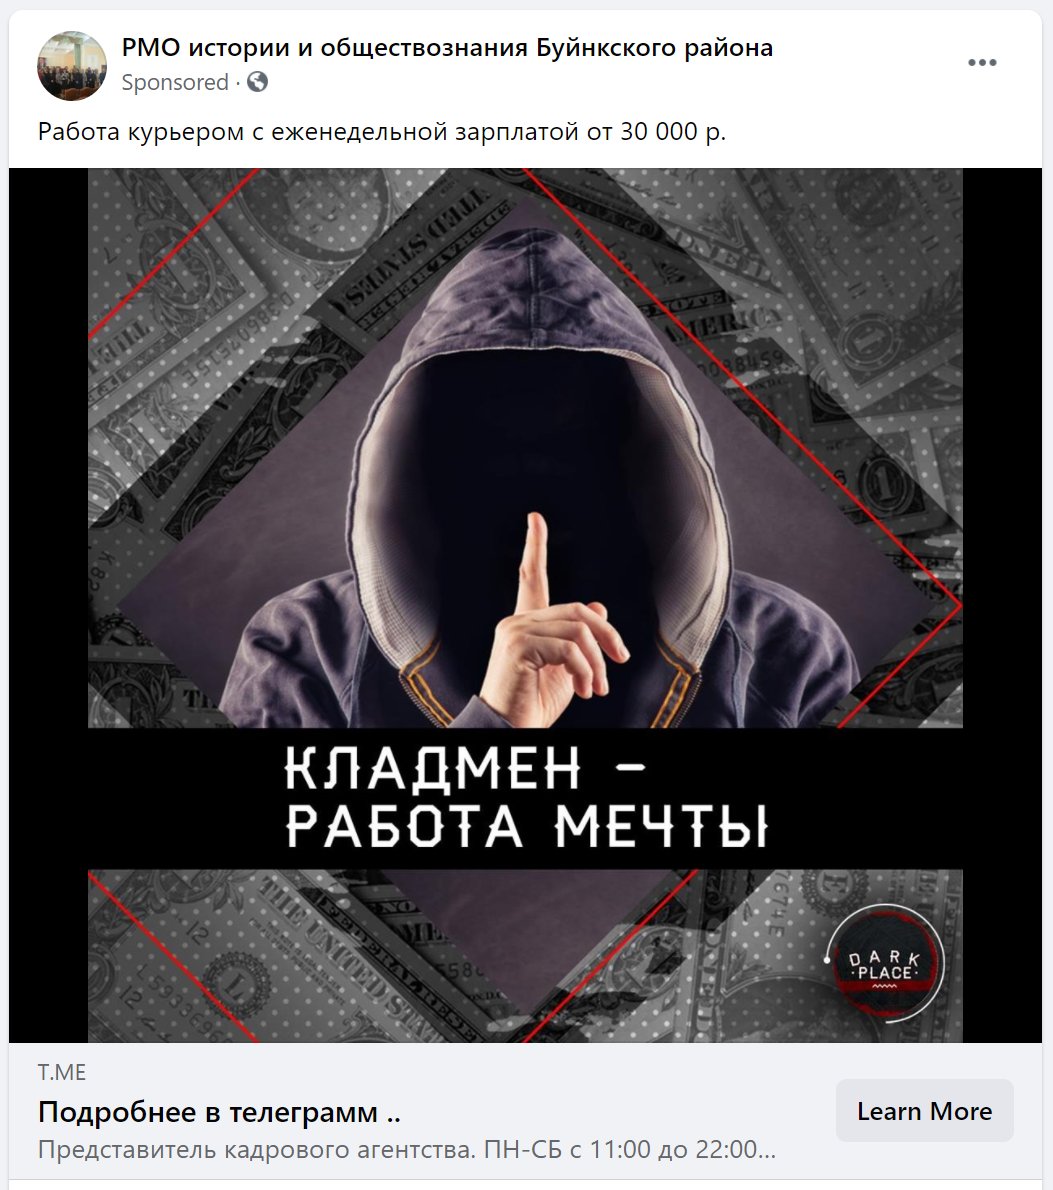 In Russia, Facebook makes money off ads for drug dealer jobs. It's not an isolated case, this happens systematically. Something's not right about the way such content is moderatedThis ad has been up for 2 weeks & has 53 critical comments — to no effect CC  @ngleicher  @fbsecurity